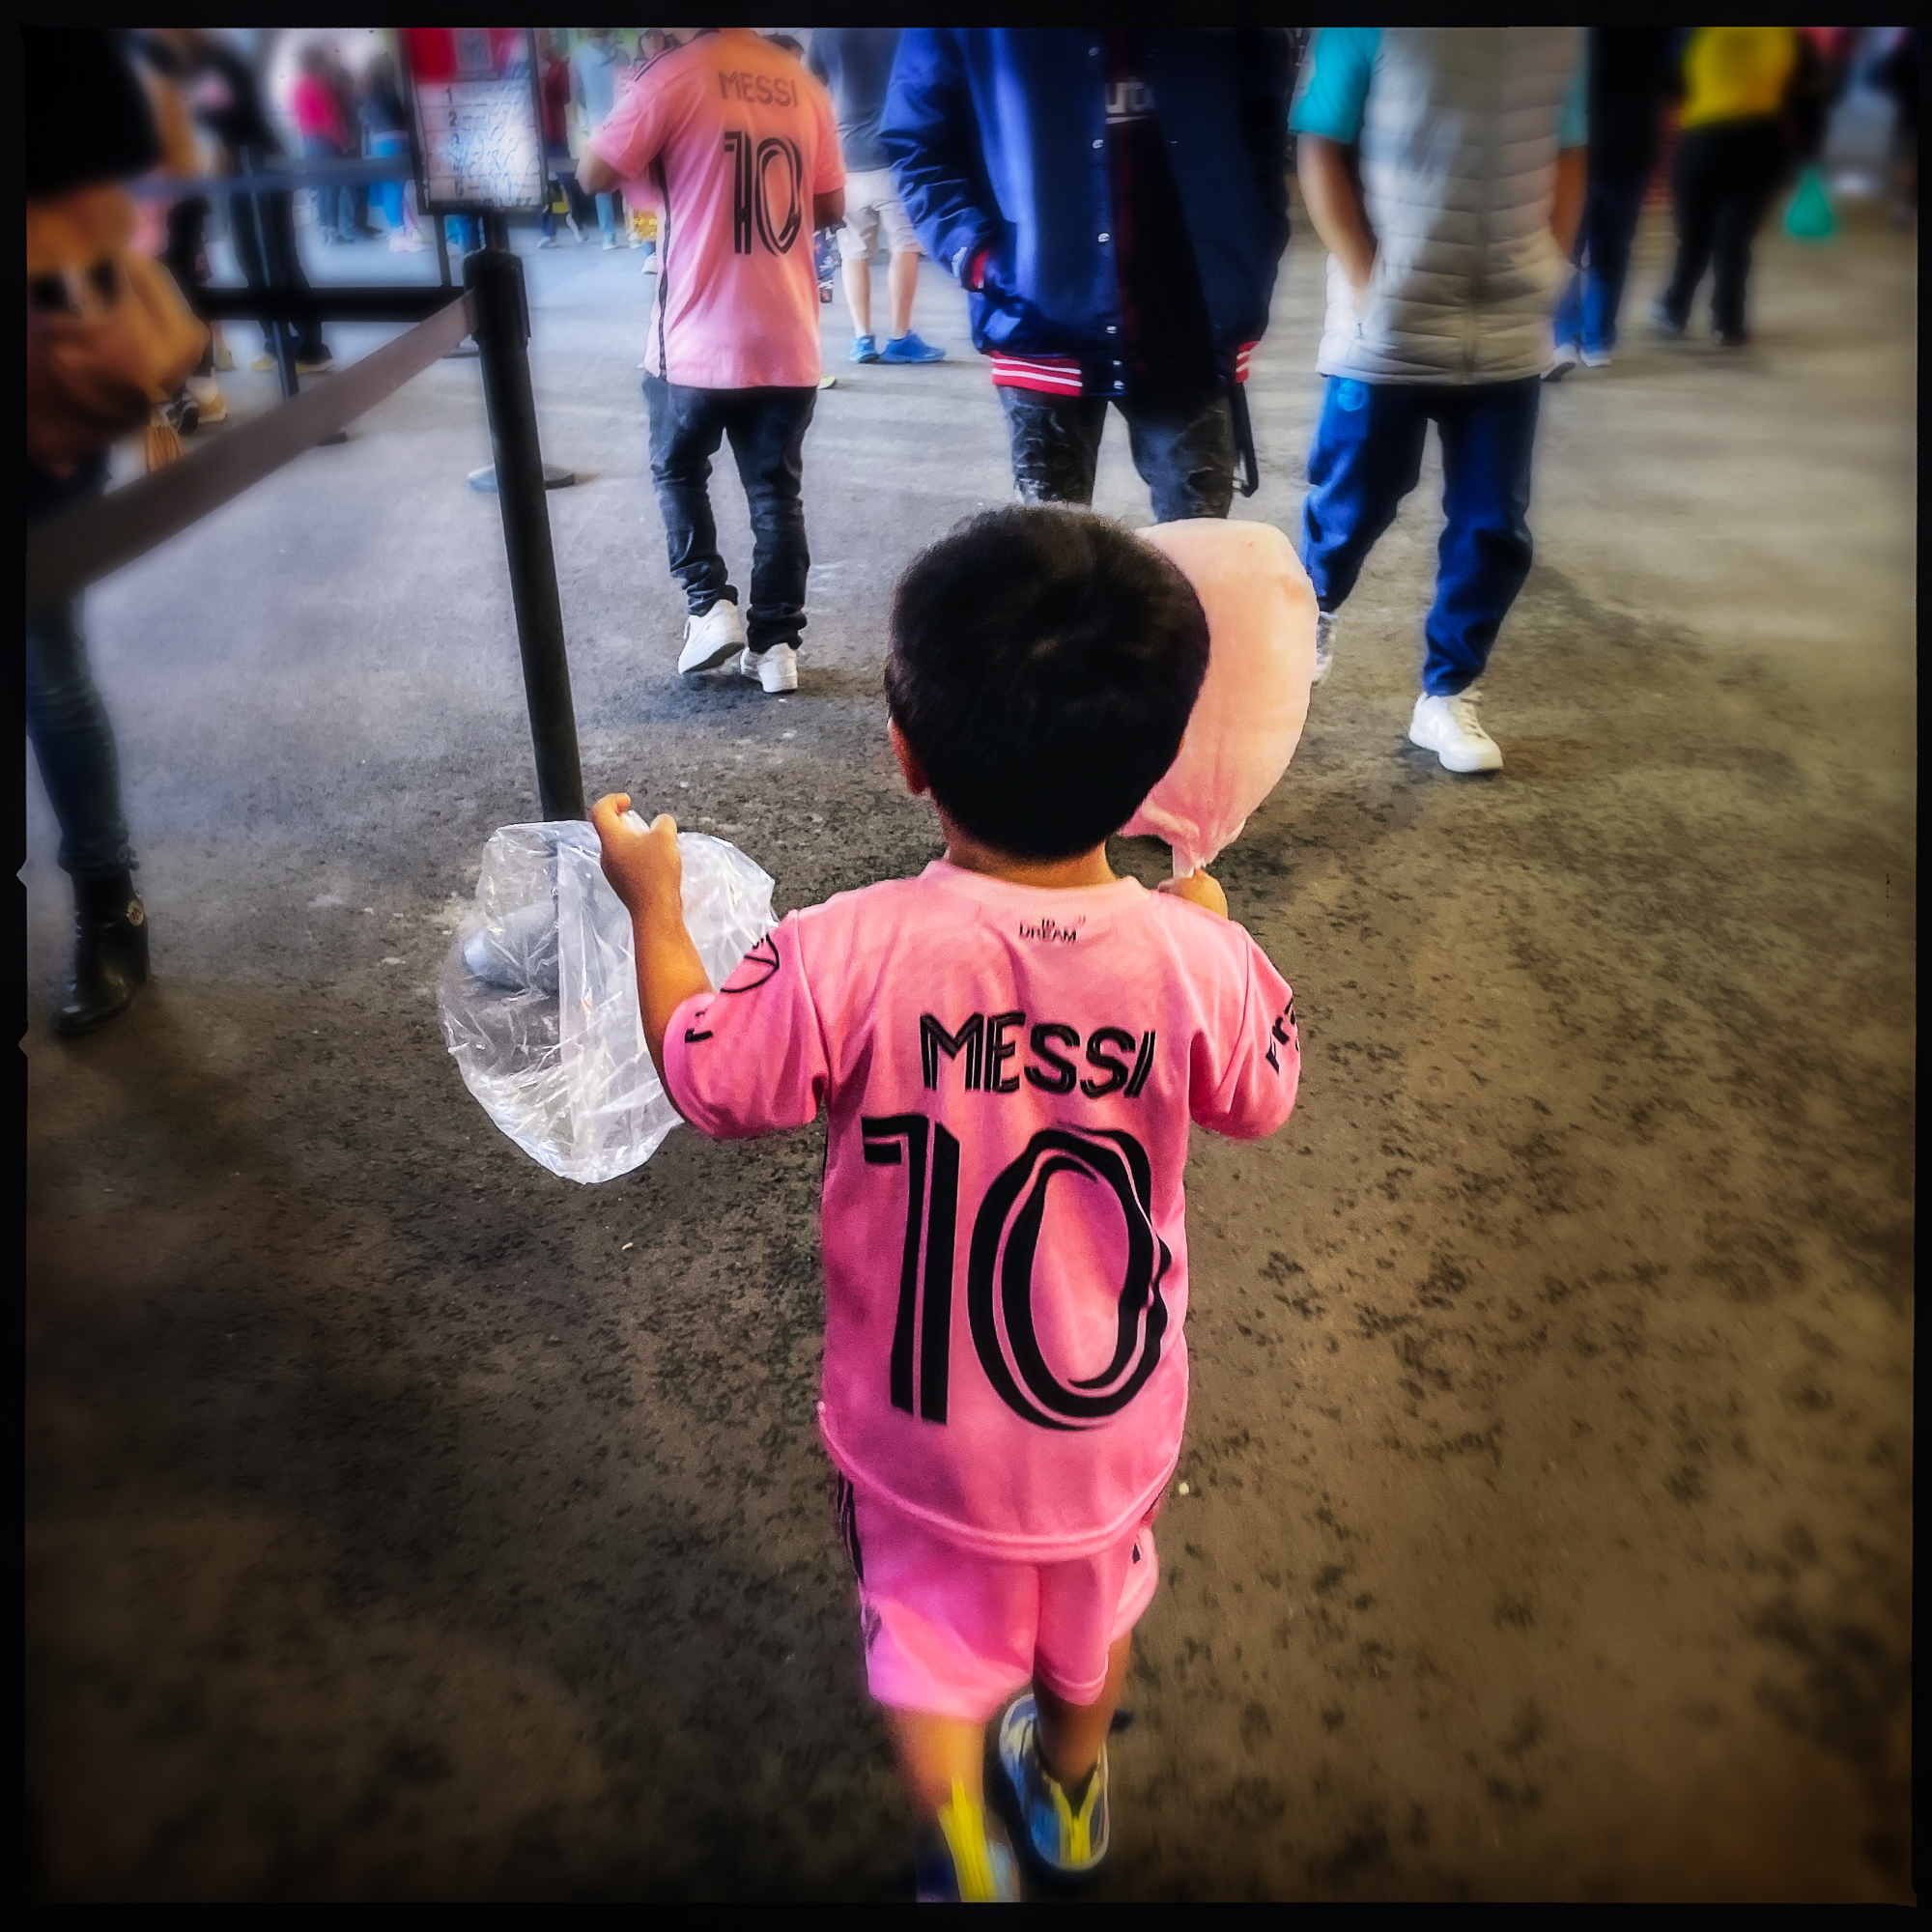 A Messi fan at the D.C. United vs. Miami game